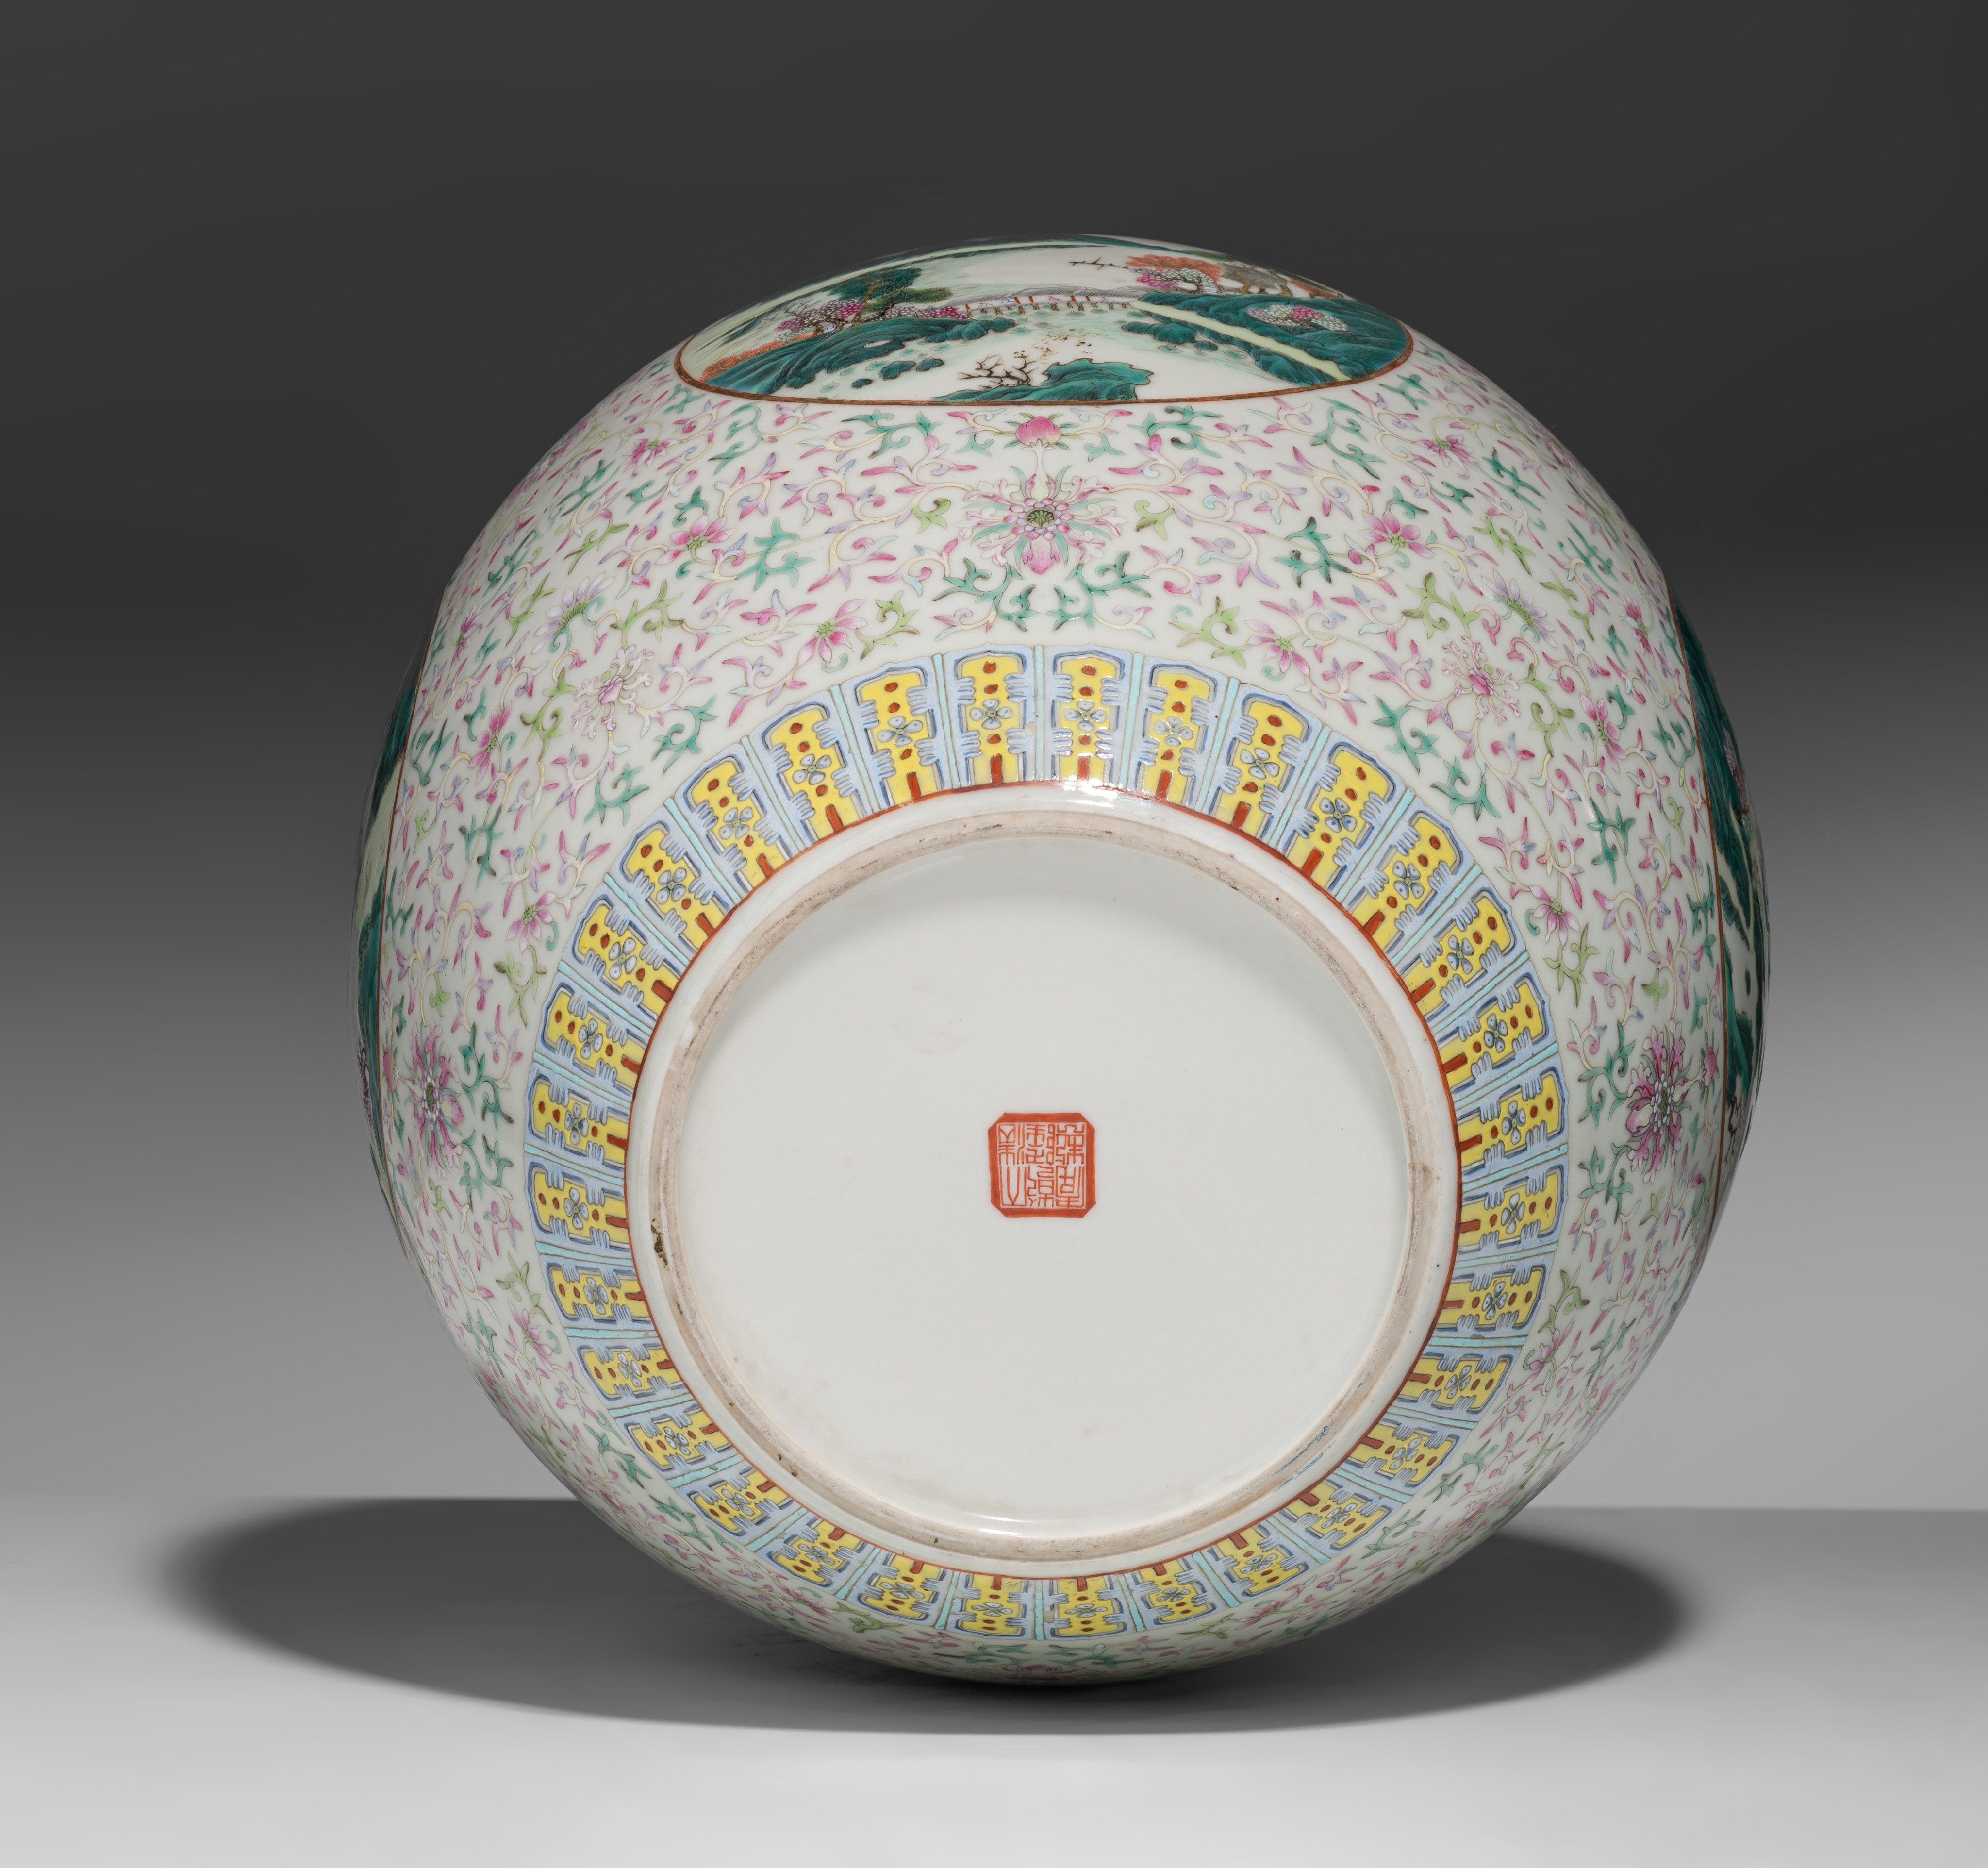 A Chinese famille rose 'Lotus scroll' zun vase, with a Qianlong mark, 19thC, H 25 - ø 23 cm - Image 7 of 8